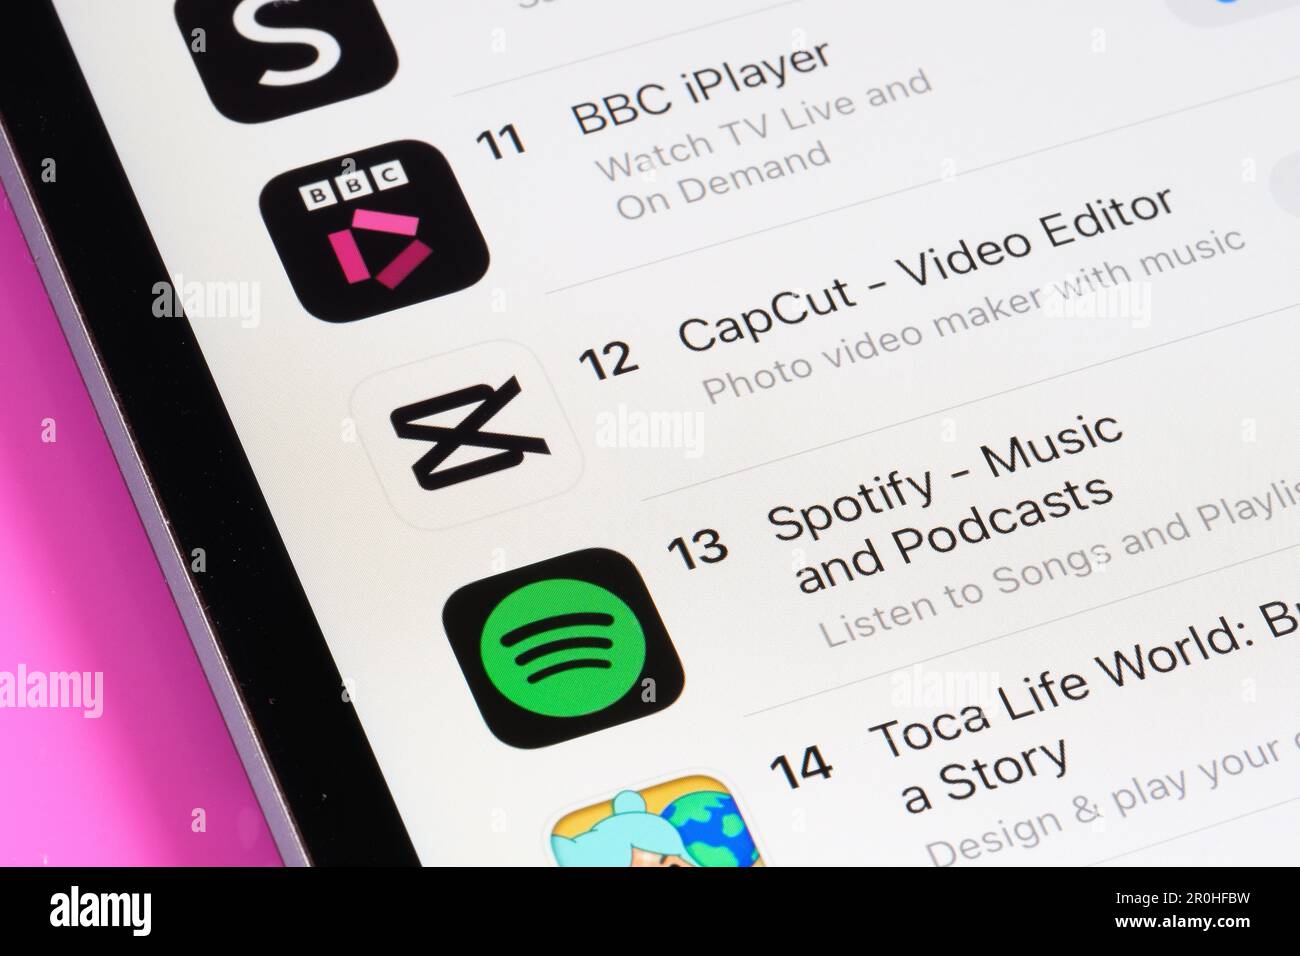 BBC iplayer, CapCut, Spotify apps seen in App Store on the screen of ipad. Selective focus. Stafford, United Kingdom, May 6, 2023 Stock Photo